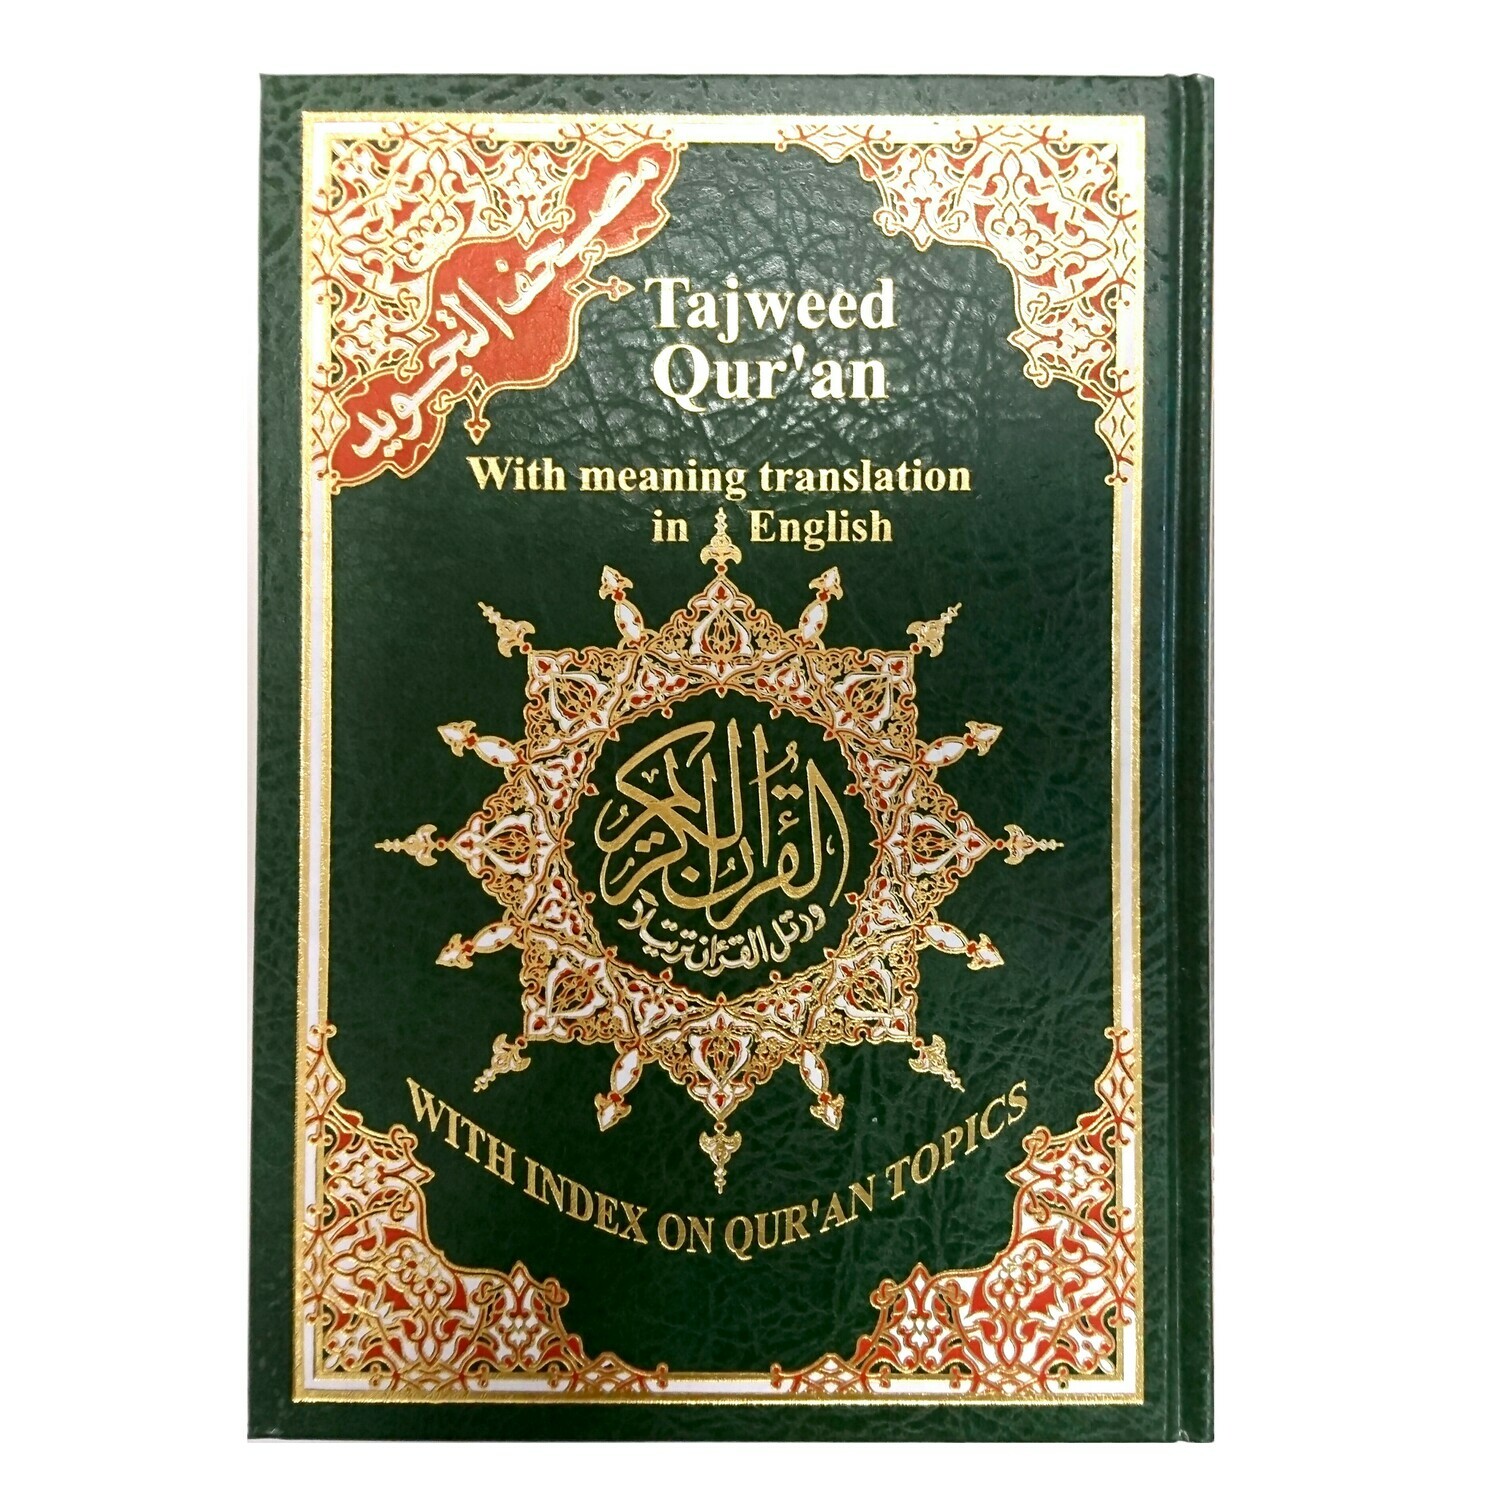 Tajweed Quran with Meanings in English Translation